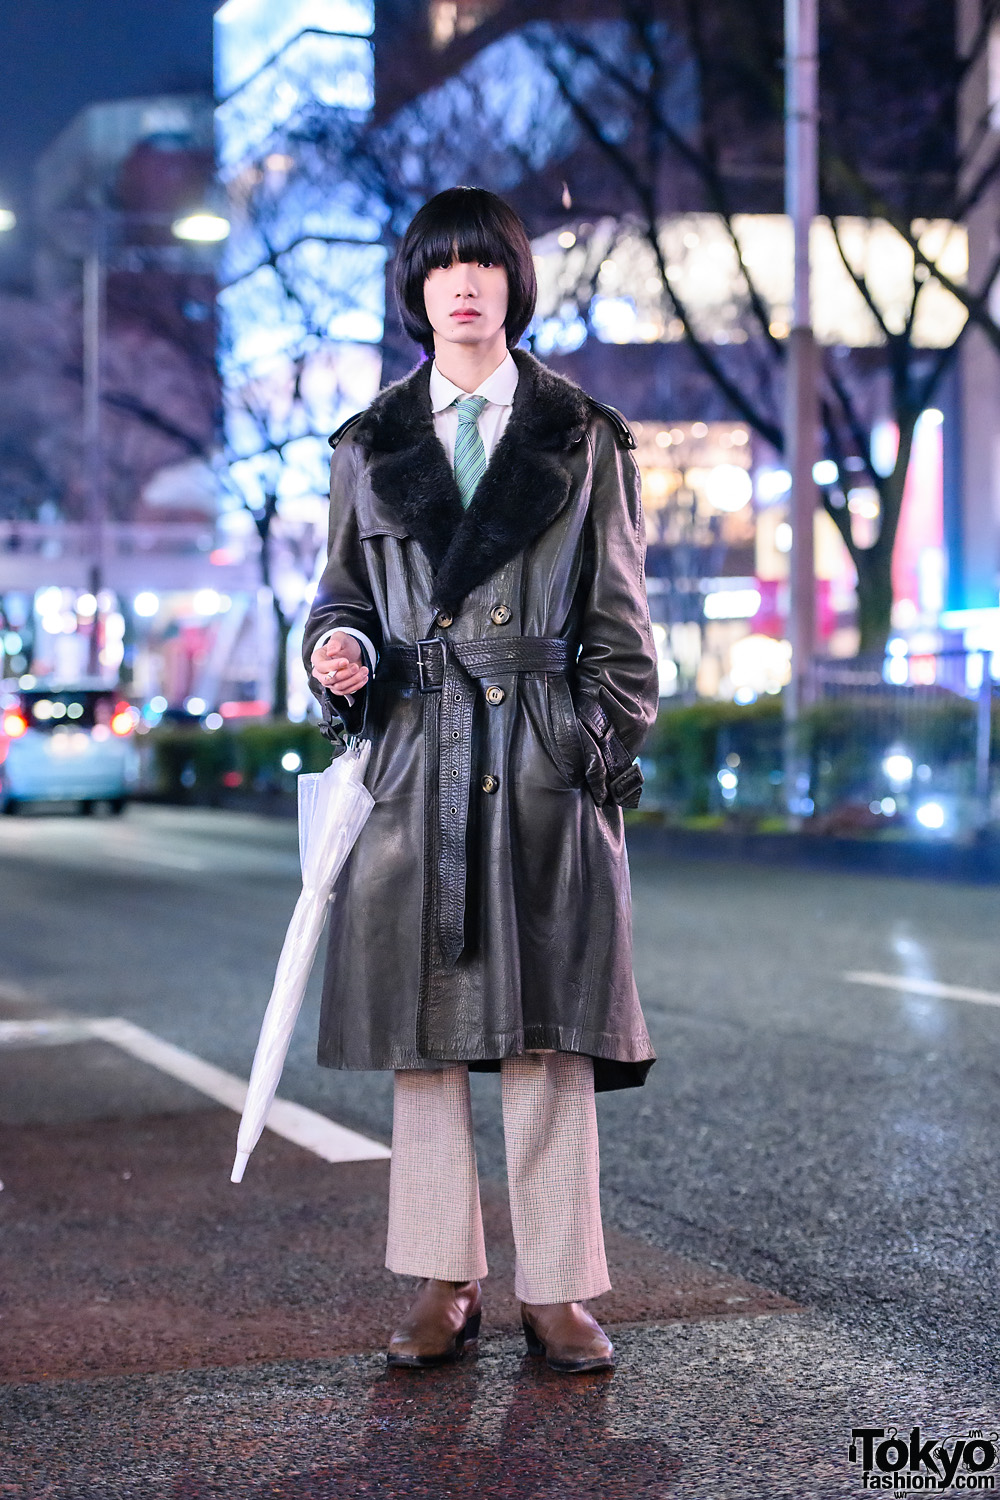 Retro Tokyo Street Style w/ Blunt Pageboy Hairstyle, Vintage Belted Leather Coat, Hugo Boss, DKNY & Balenciaga Boots